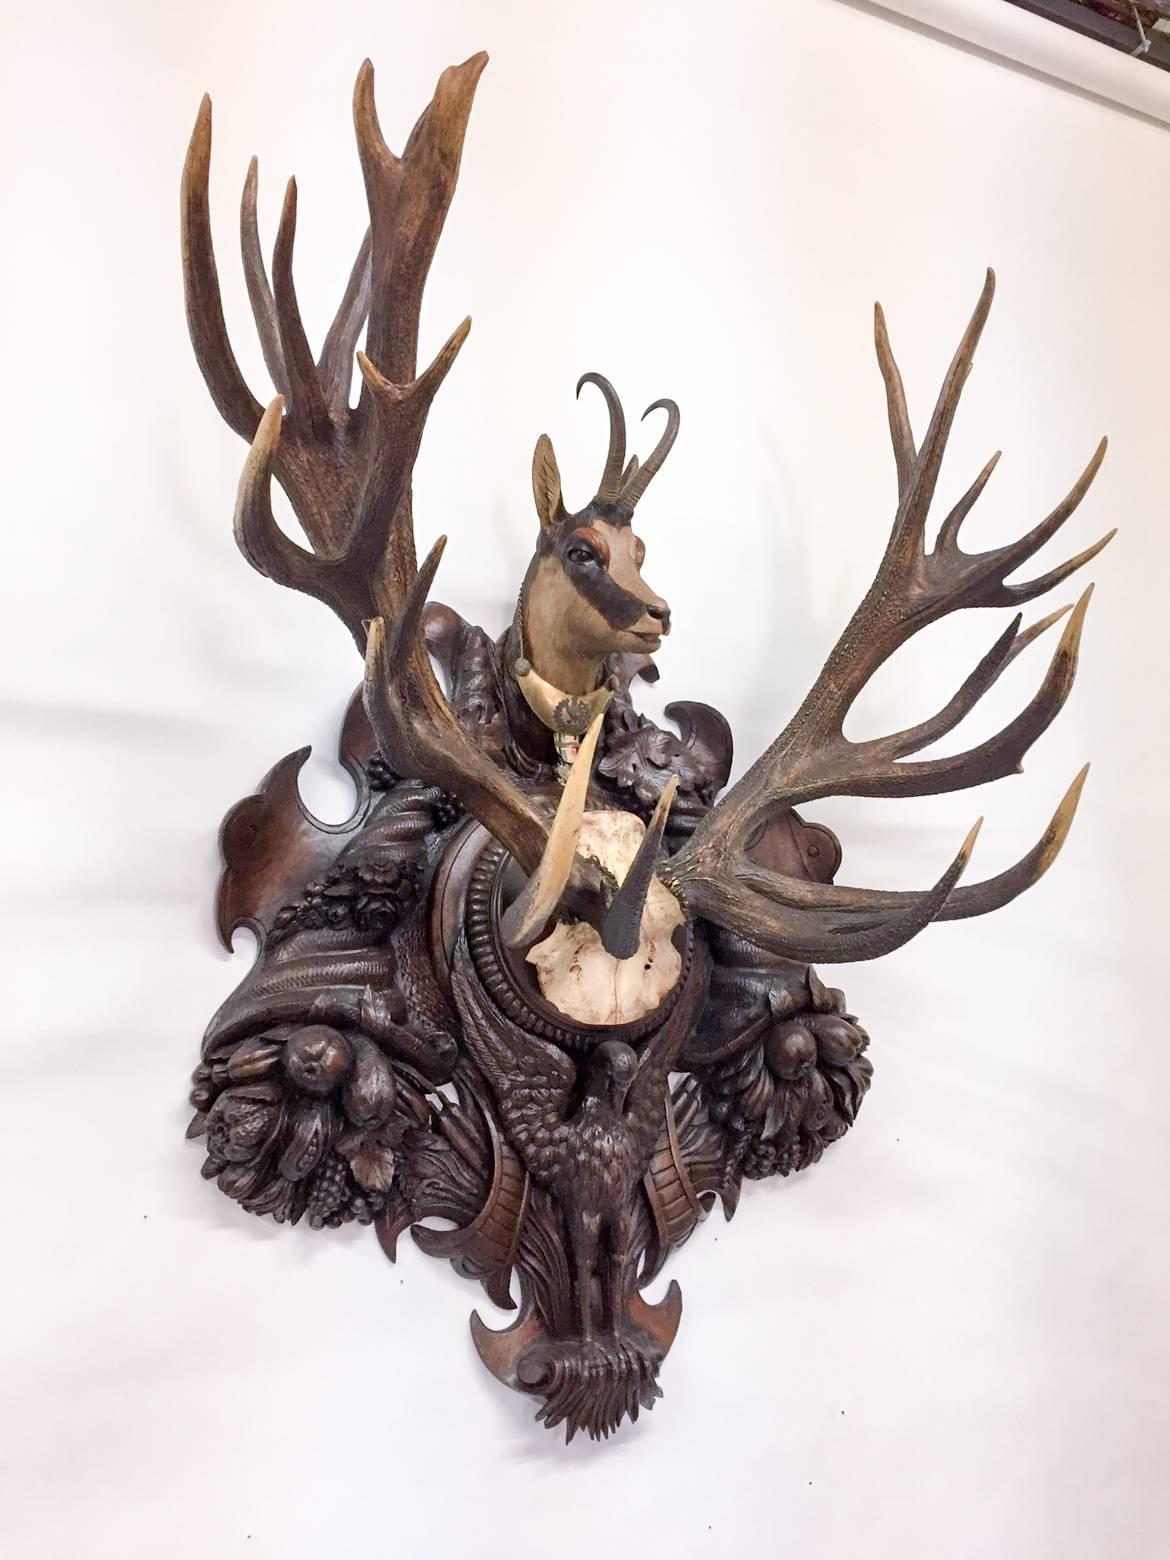 This double mount trophy features both a Red Stag and a Pyrenees chamois mounted on an original black forest plaque, decorated with a Napoleonic gorget and French Medal of Honor. The carvings on this plaque include a to-scale carved Pyrenees Chamois